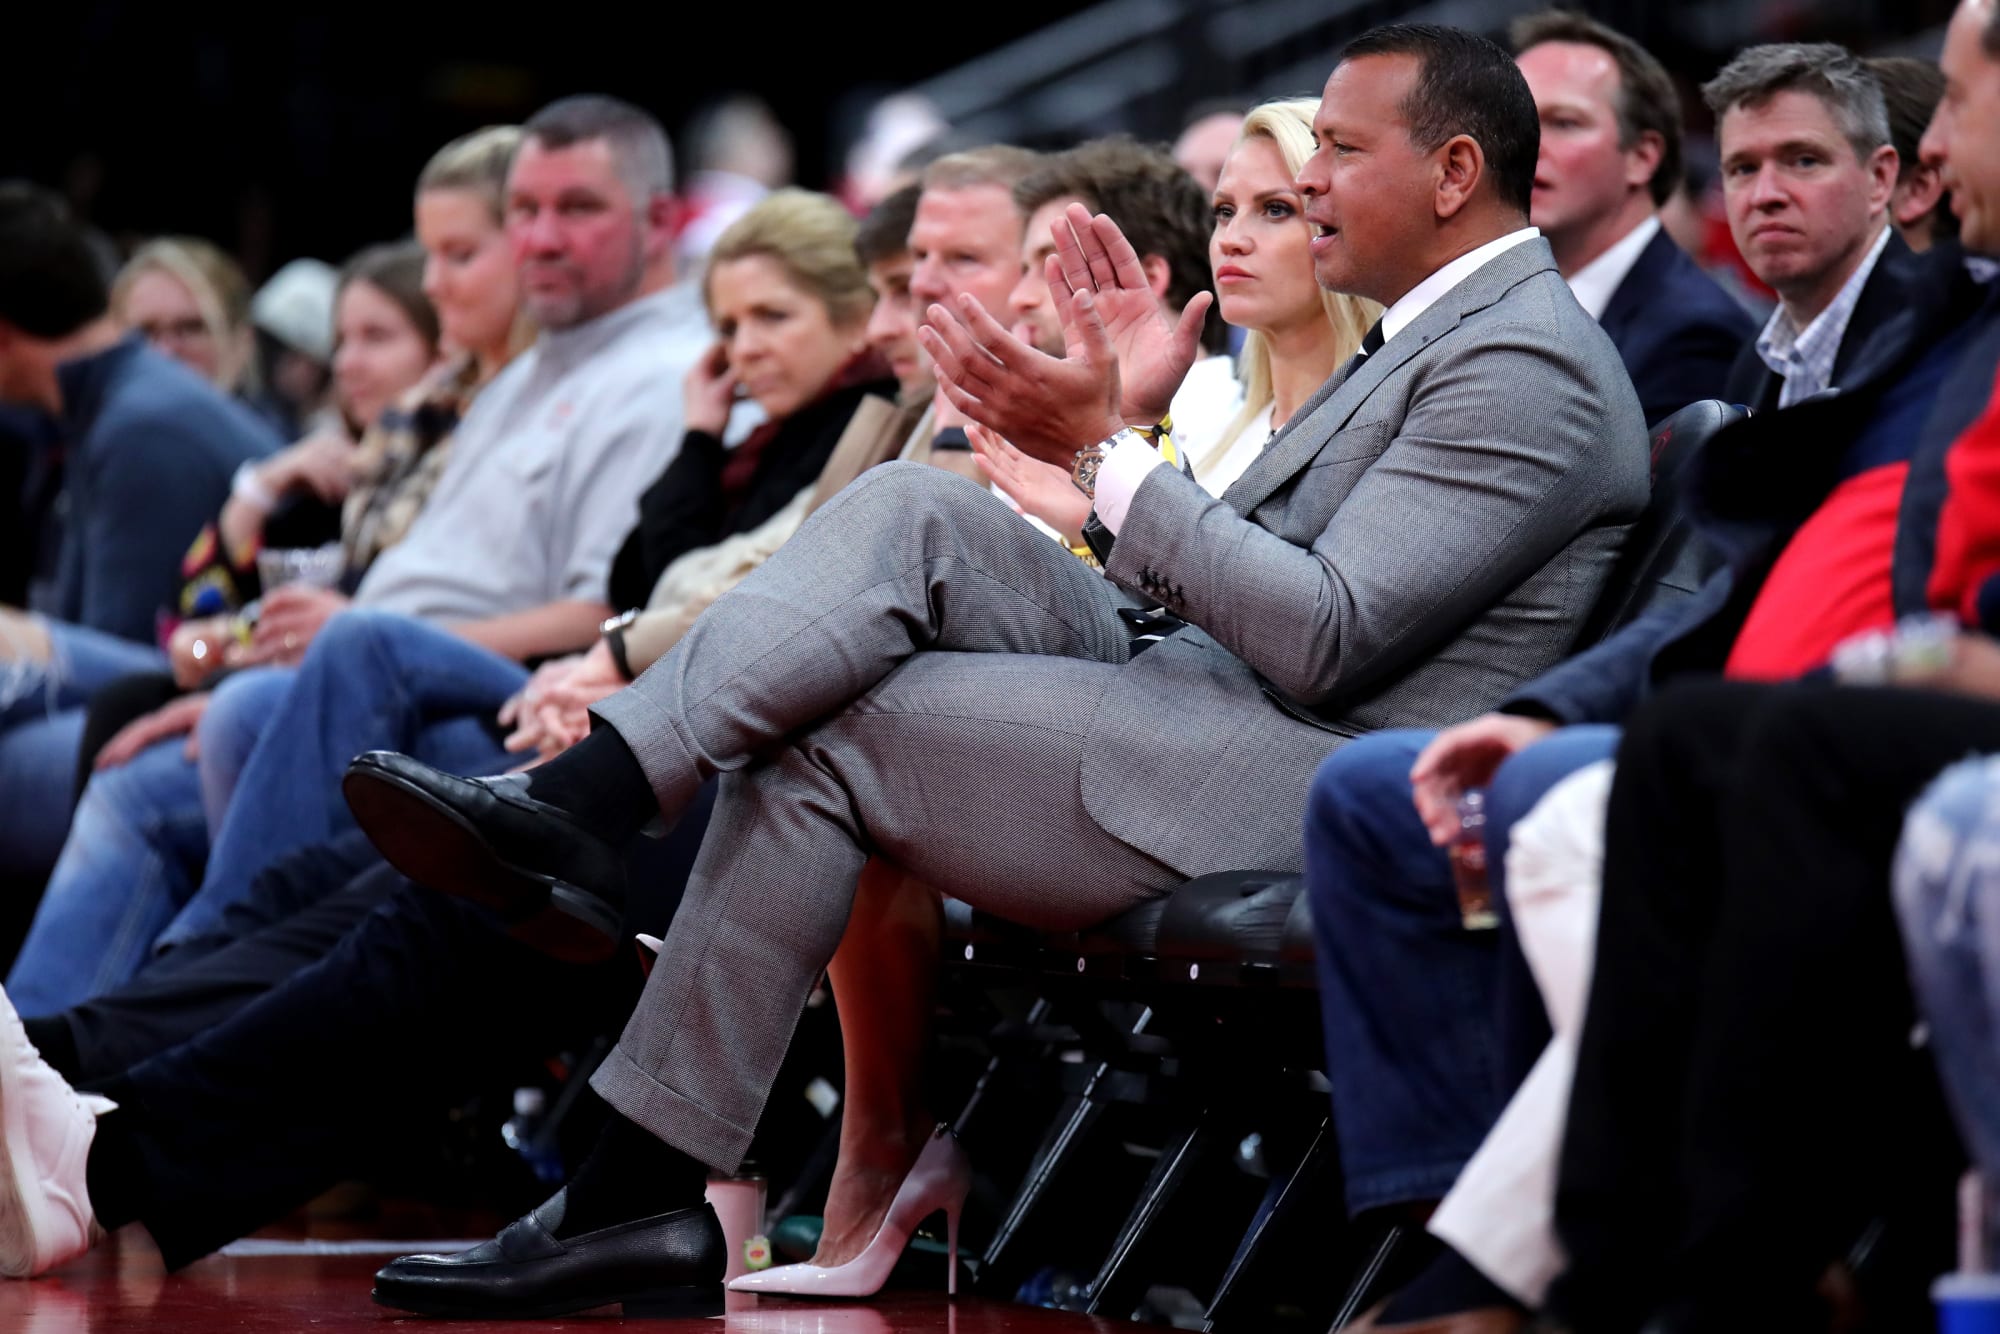 Timberwolves flop as minority owner A-Rod watches in disbelief